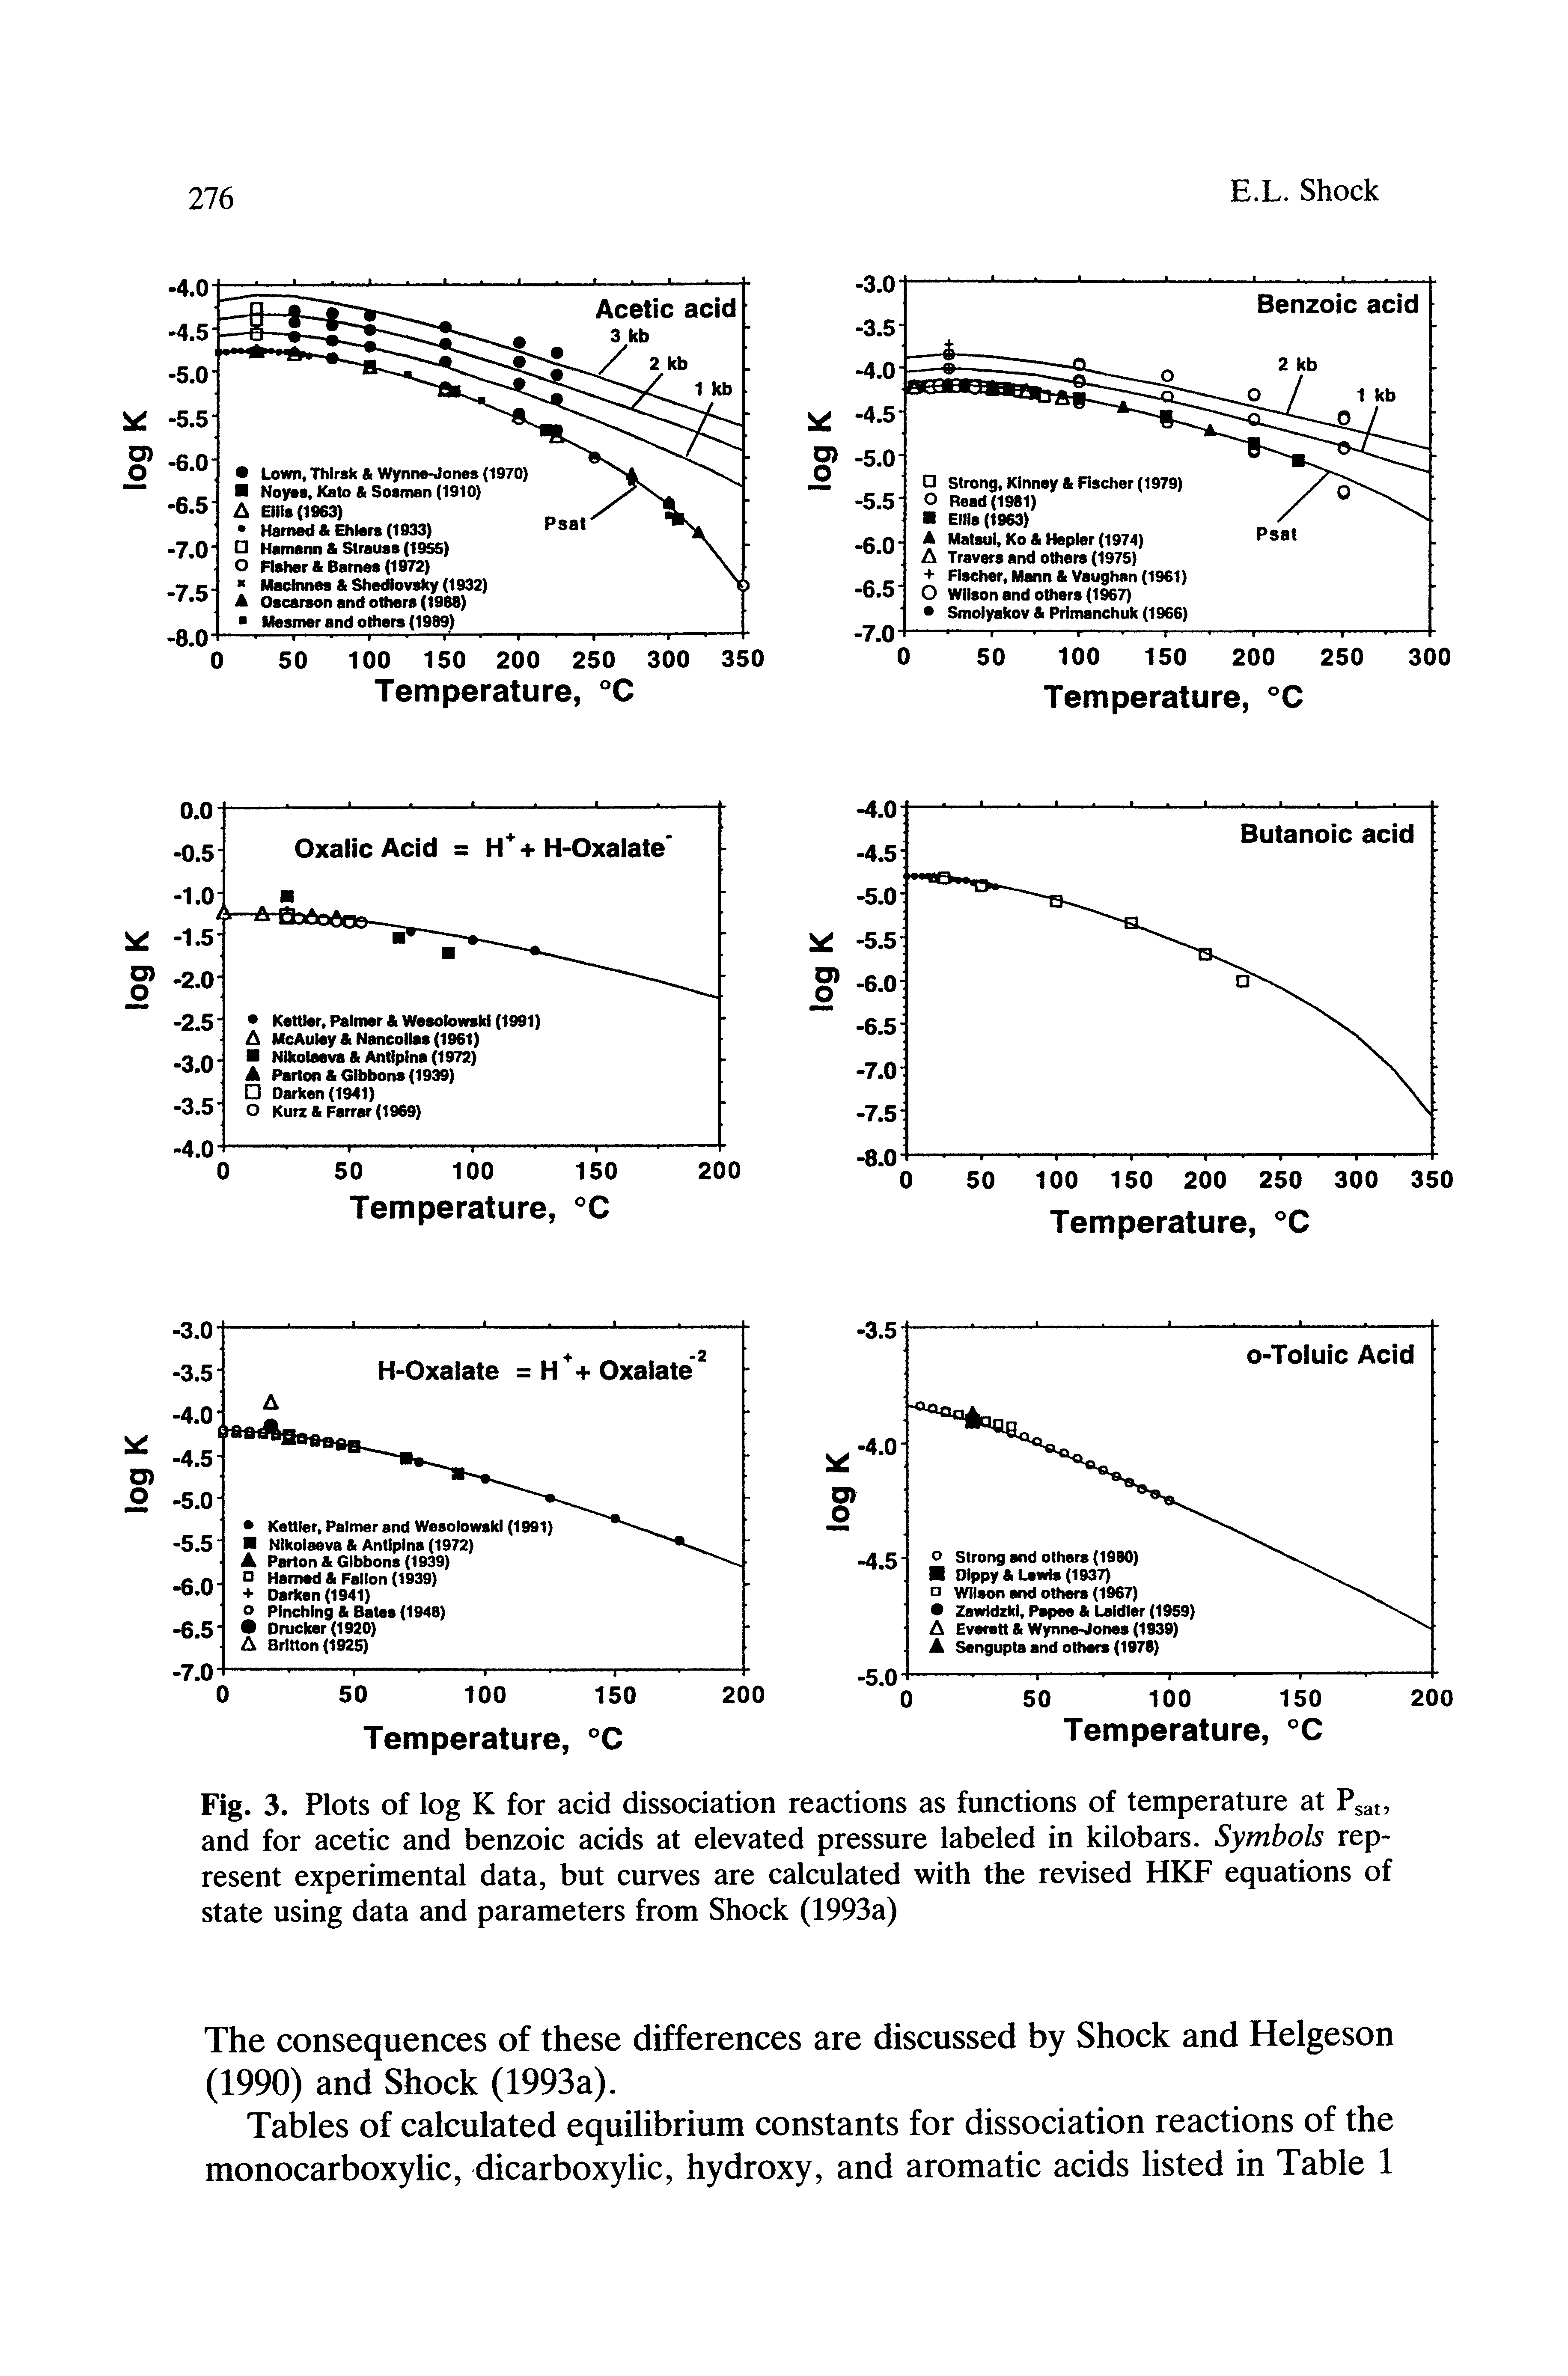 Fig. 3. Plots of log K for acid dissociation reactions as functions of temperature at Psat, and for acetic and benzoic acids at elevated pressure labeled in kilobars. Symbols represent experimental data, but curves are calculated with the revised HKF equations of state using data and parameters from Shock (1993a)...